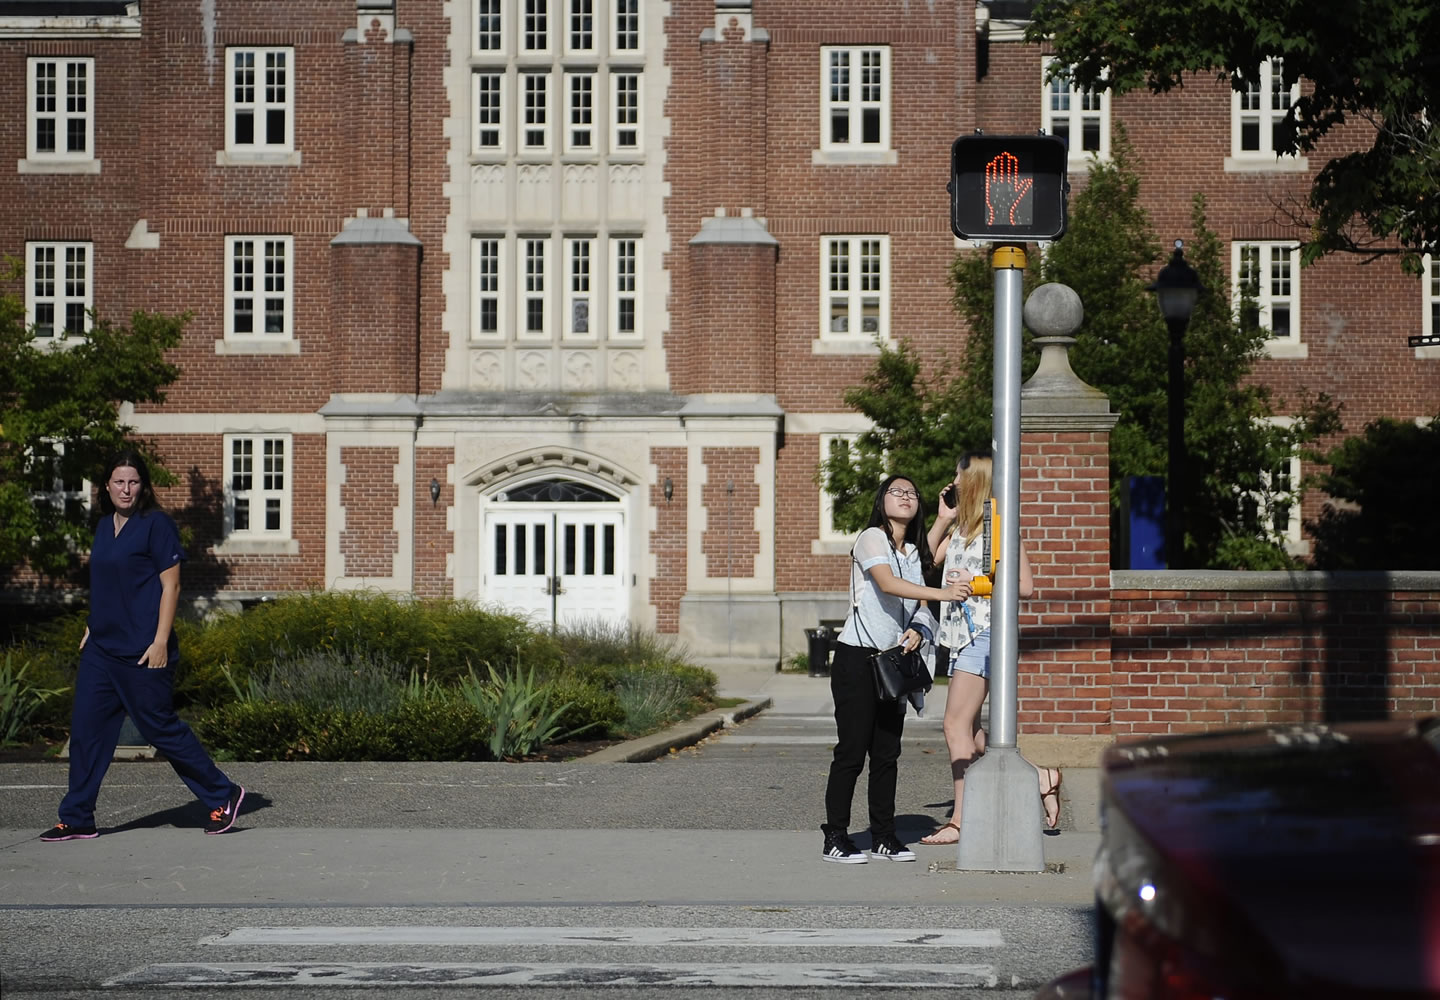 University of Connecticut sophomore Anyi Yang of Beijing pushes a button at a crosswalk outside her dorm in Storrs, Conn. A surge of students from China is leading U.S. universities to confront the challenges of integrating them more into American campus life.